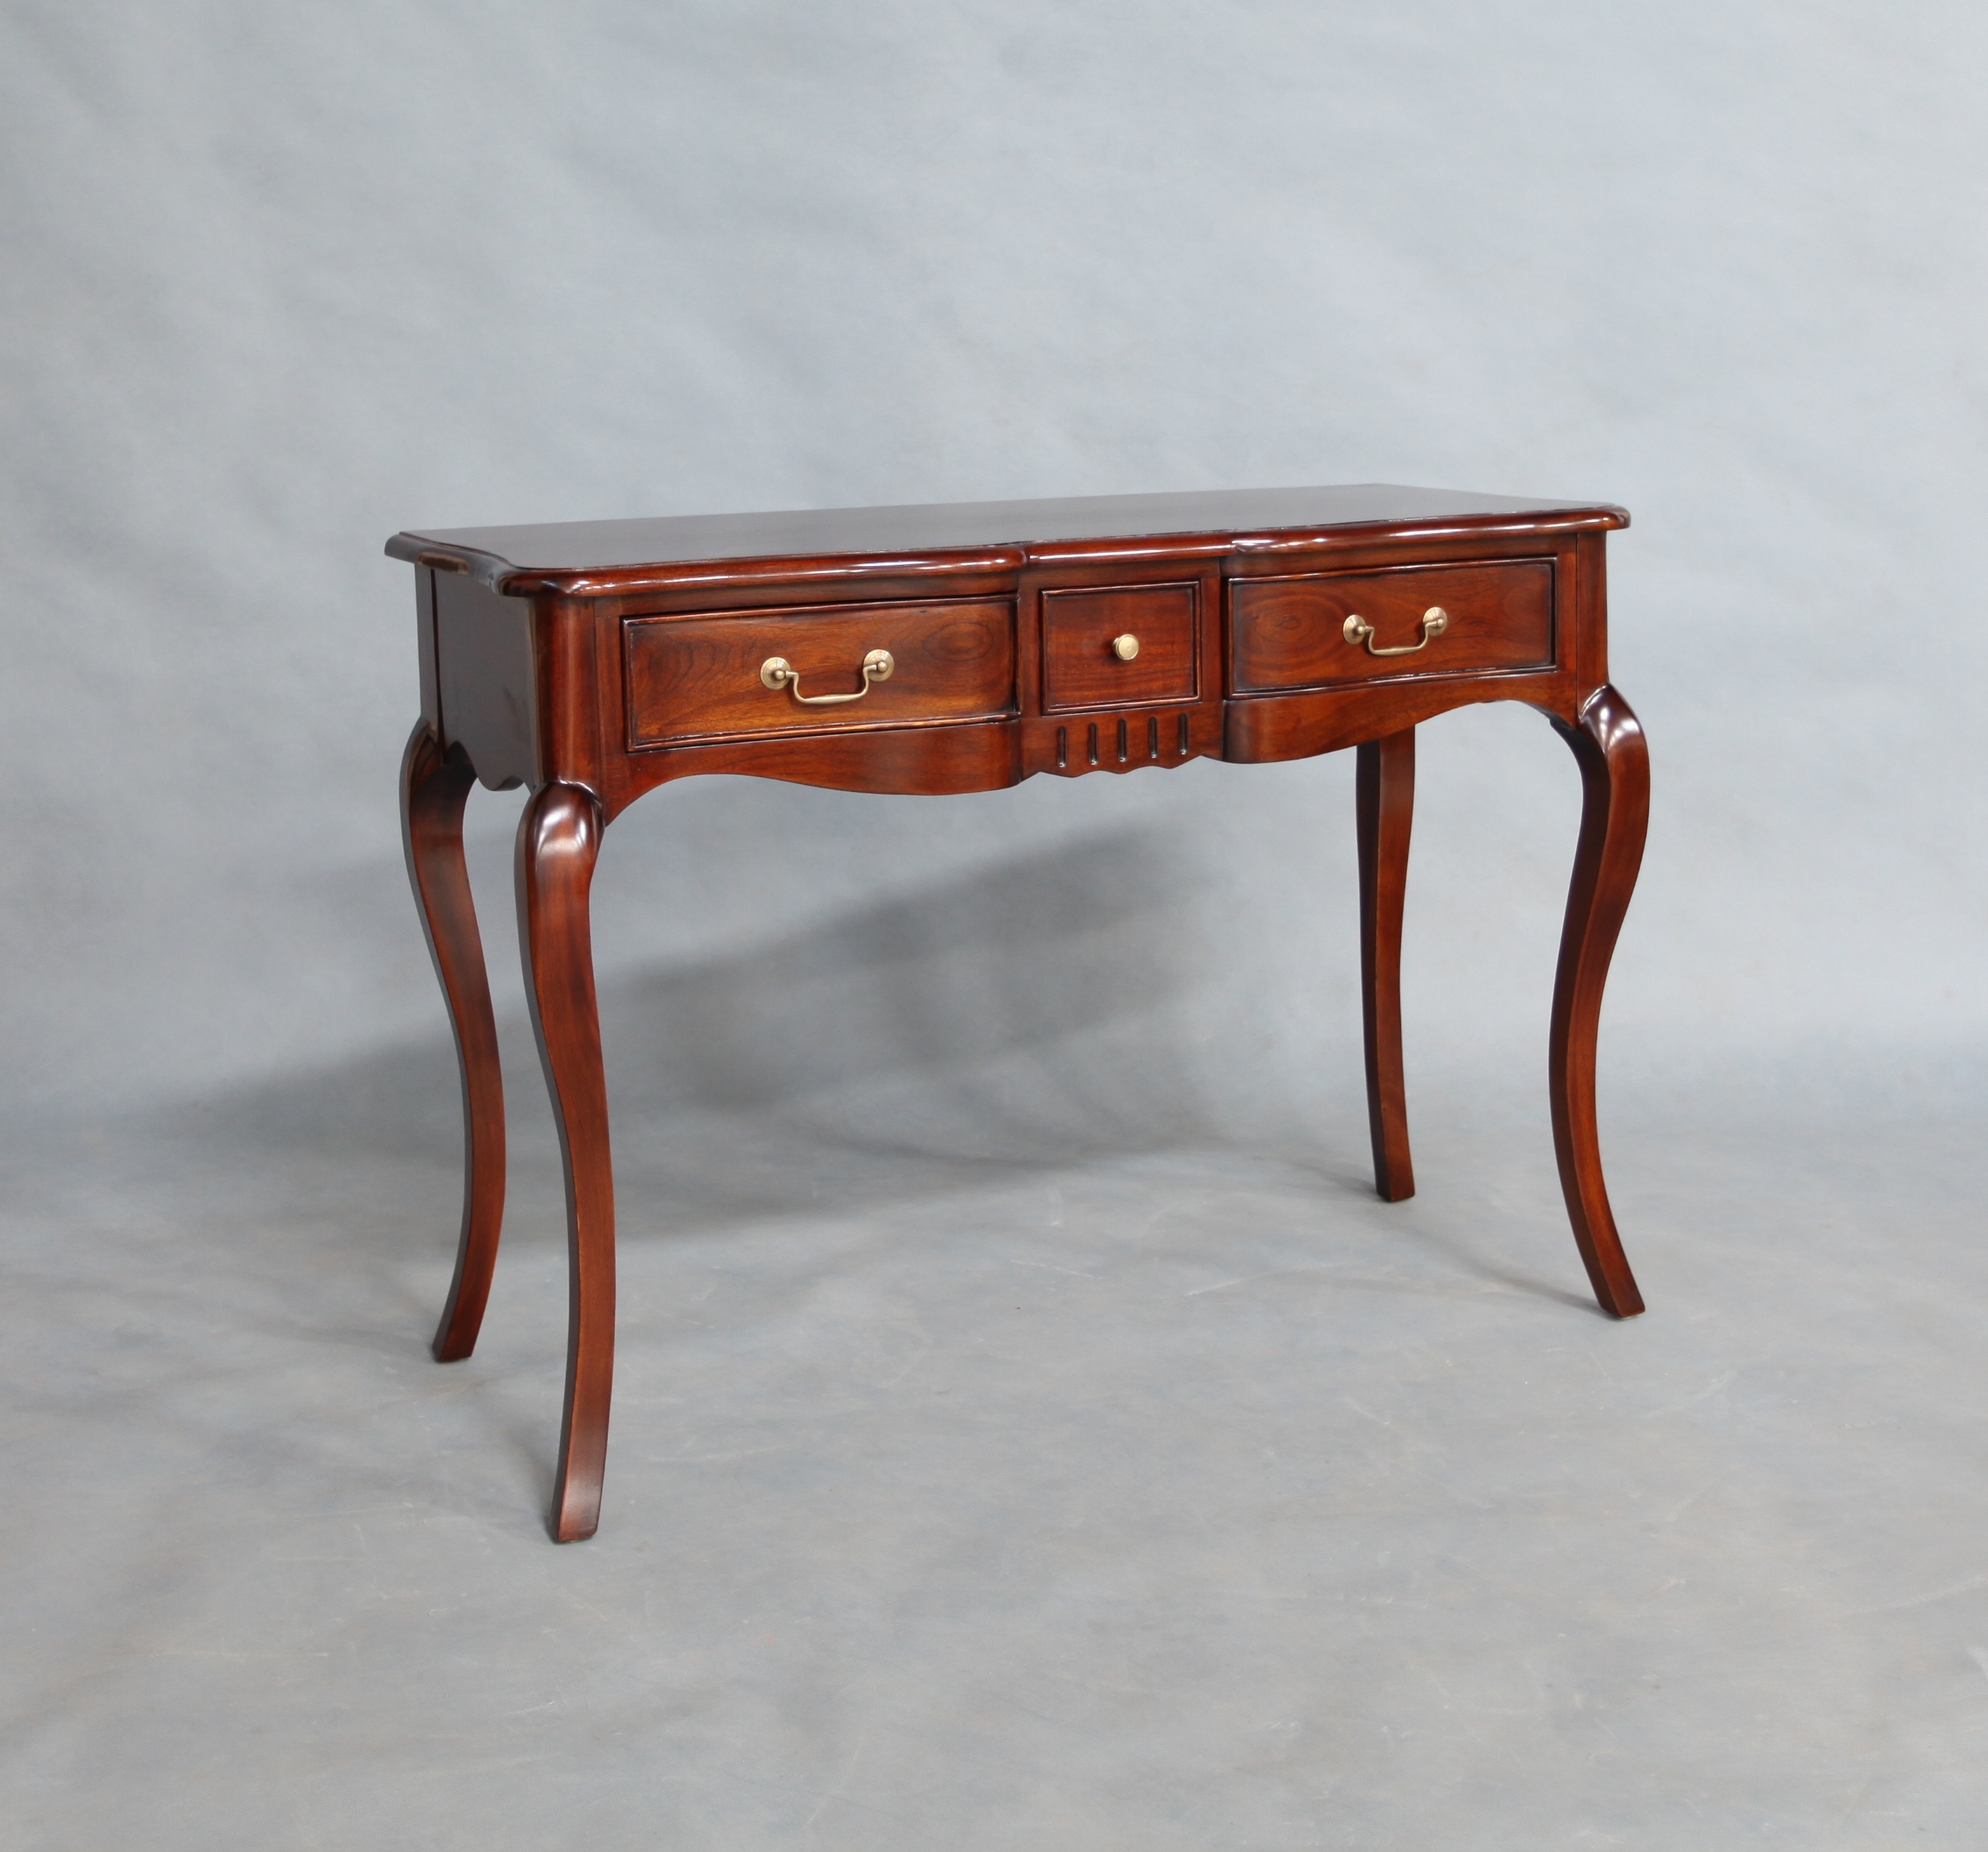 Mahogany Wood Small Office Desk With 3 Drawers Turendav